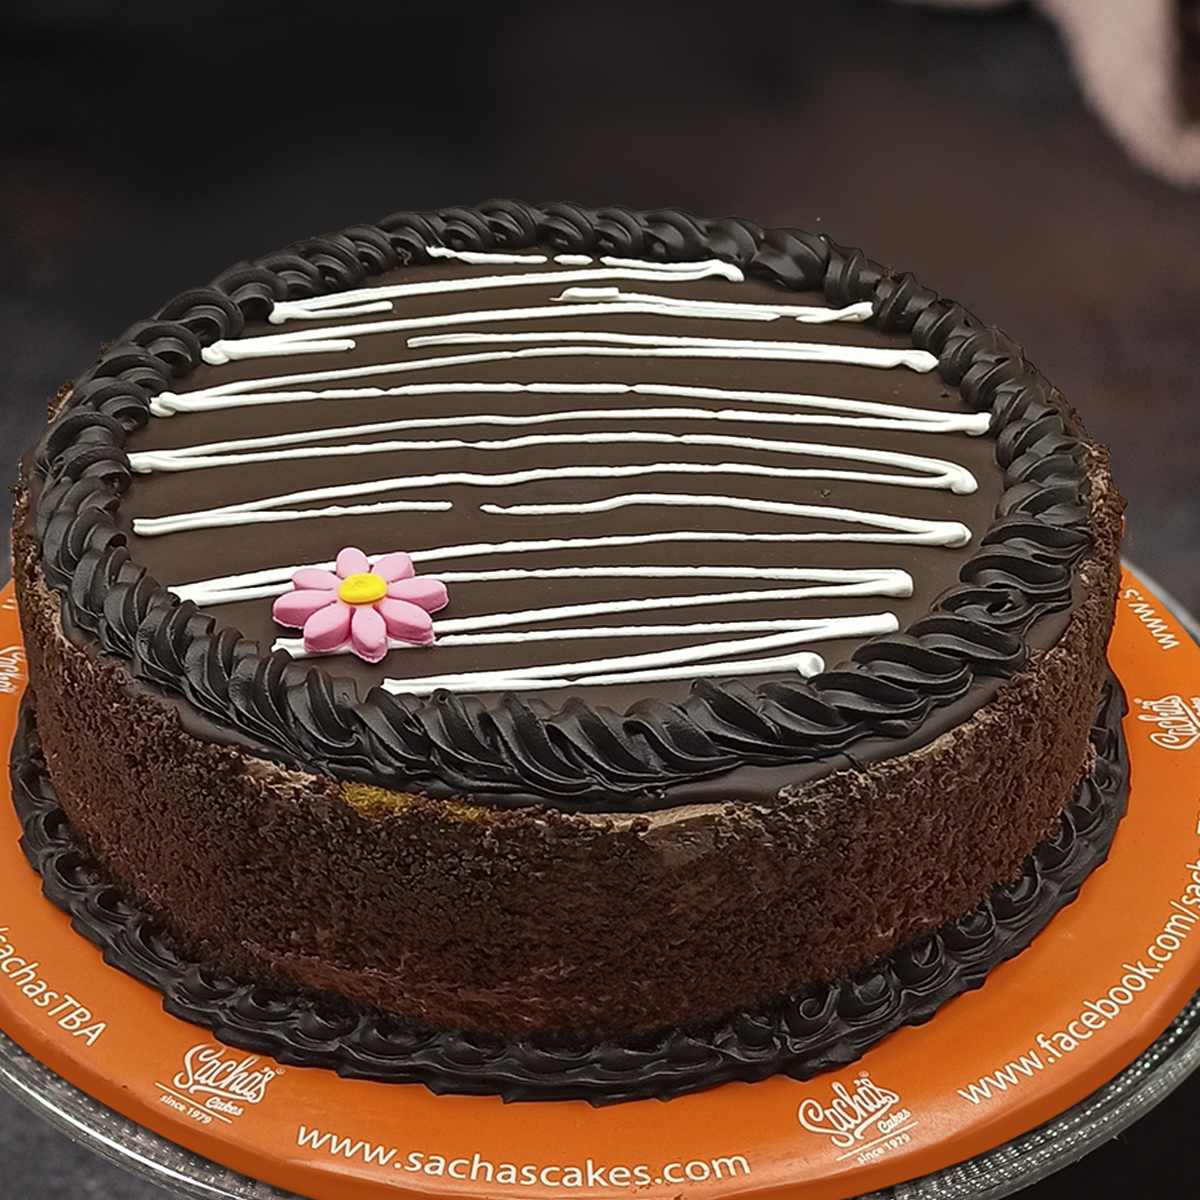 Send THREE MILK CHOCOLATE CAKE BY DELIZIA CAKES to Pakistan | Online Gifts  delivery in Pakistan